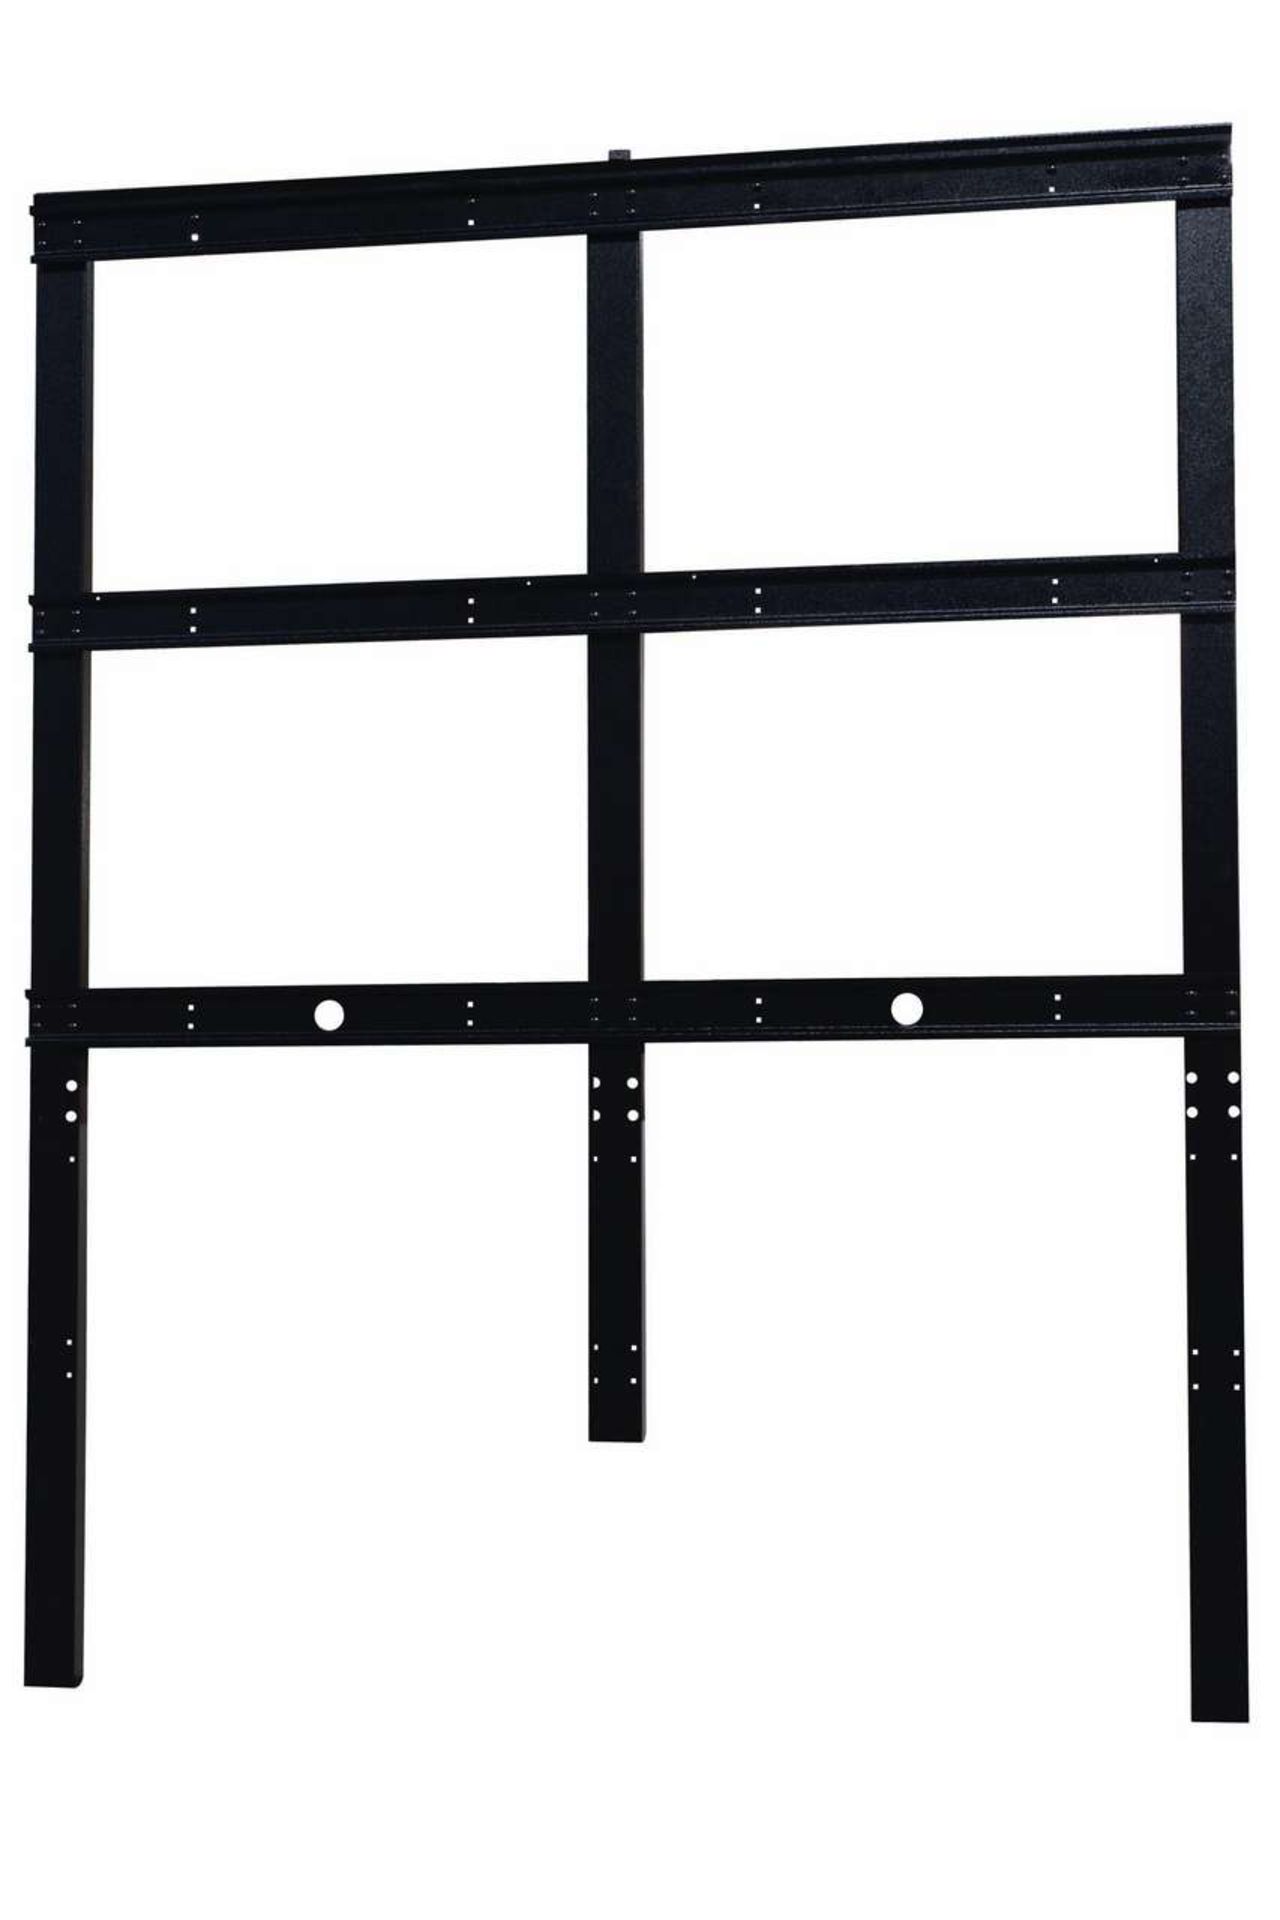 (53) WALL SUPPORT 65" GOS-II BLACK TEXT SE